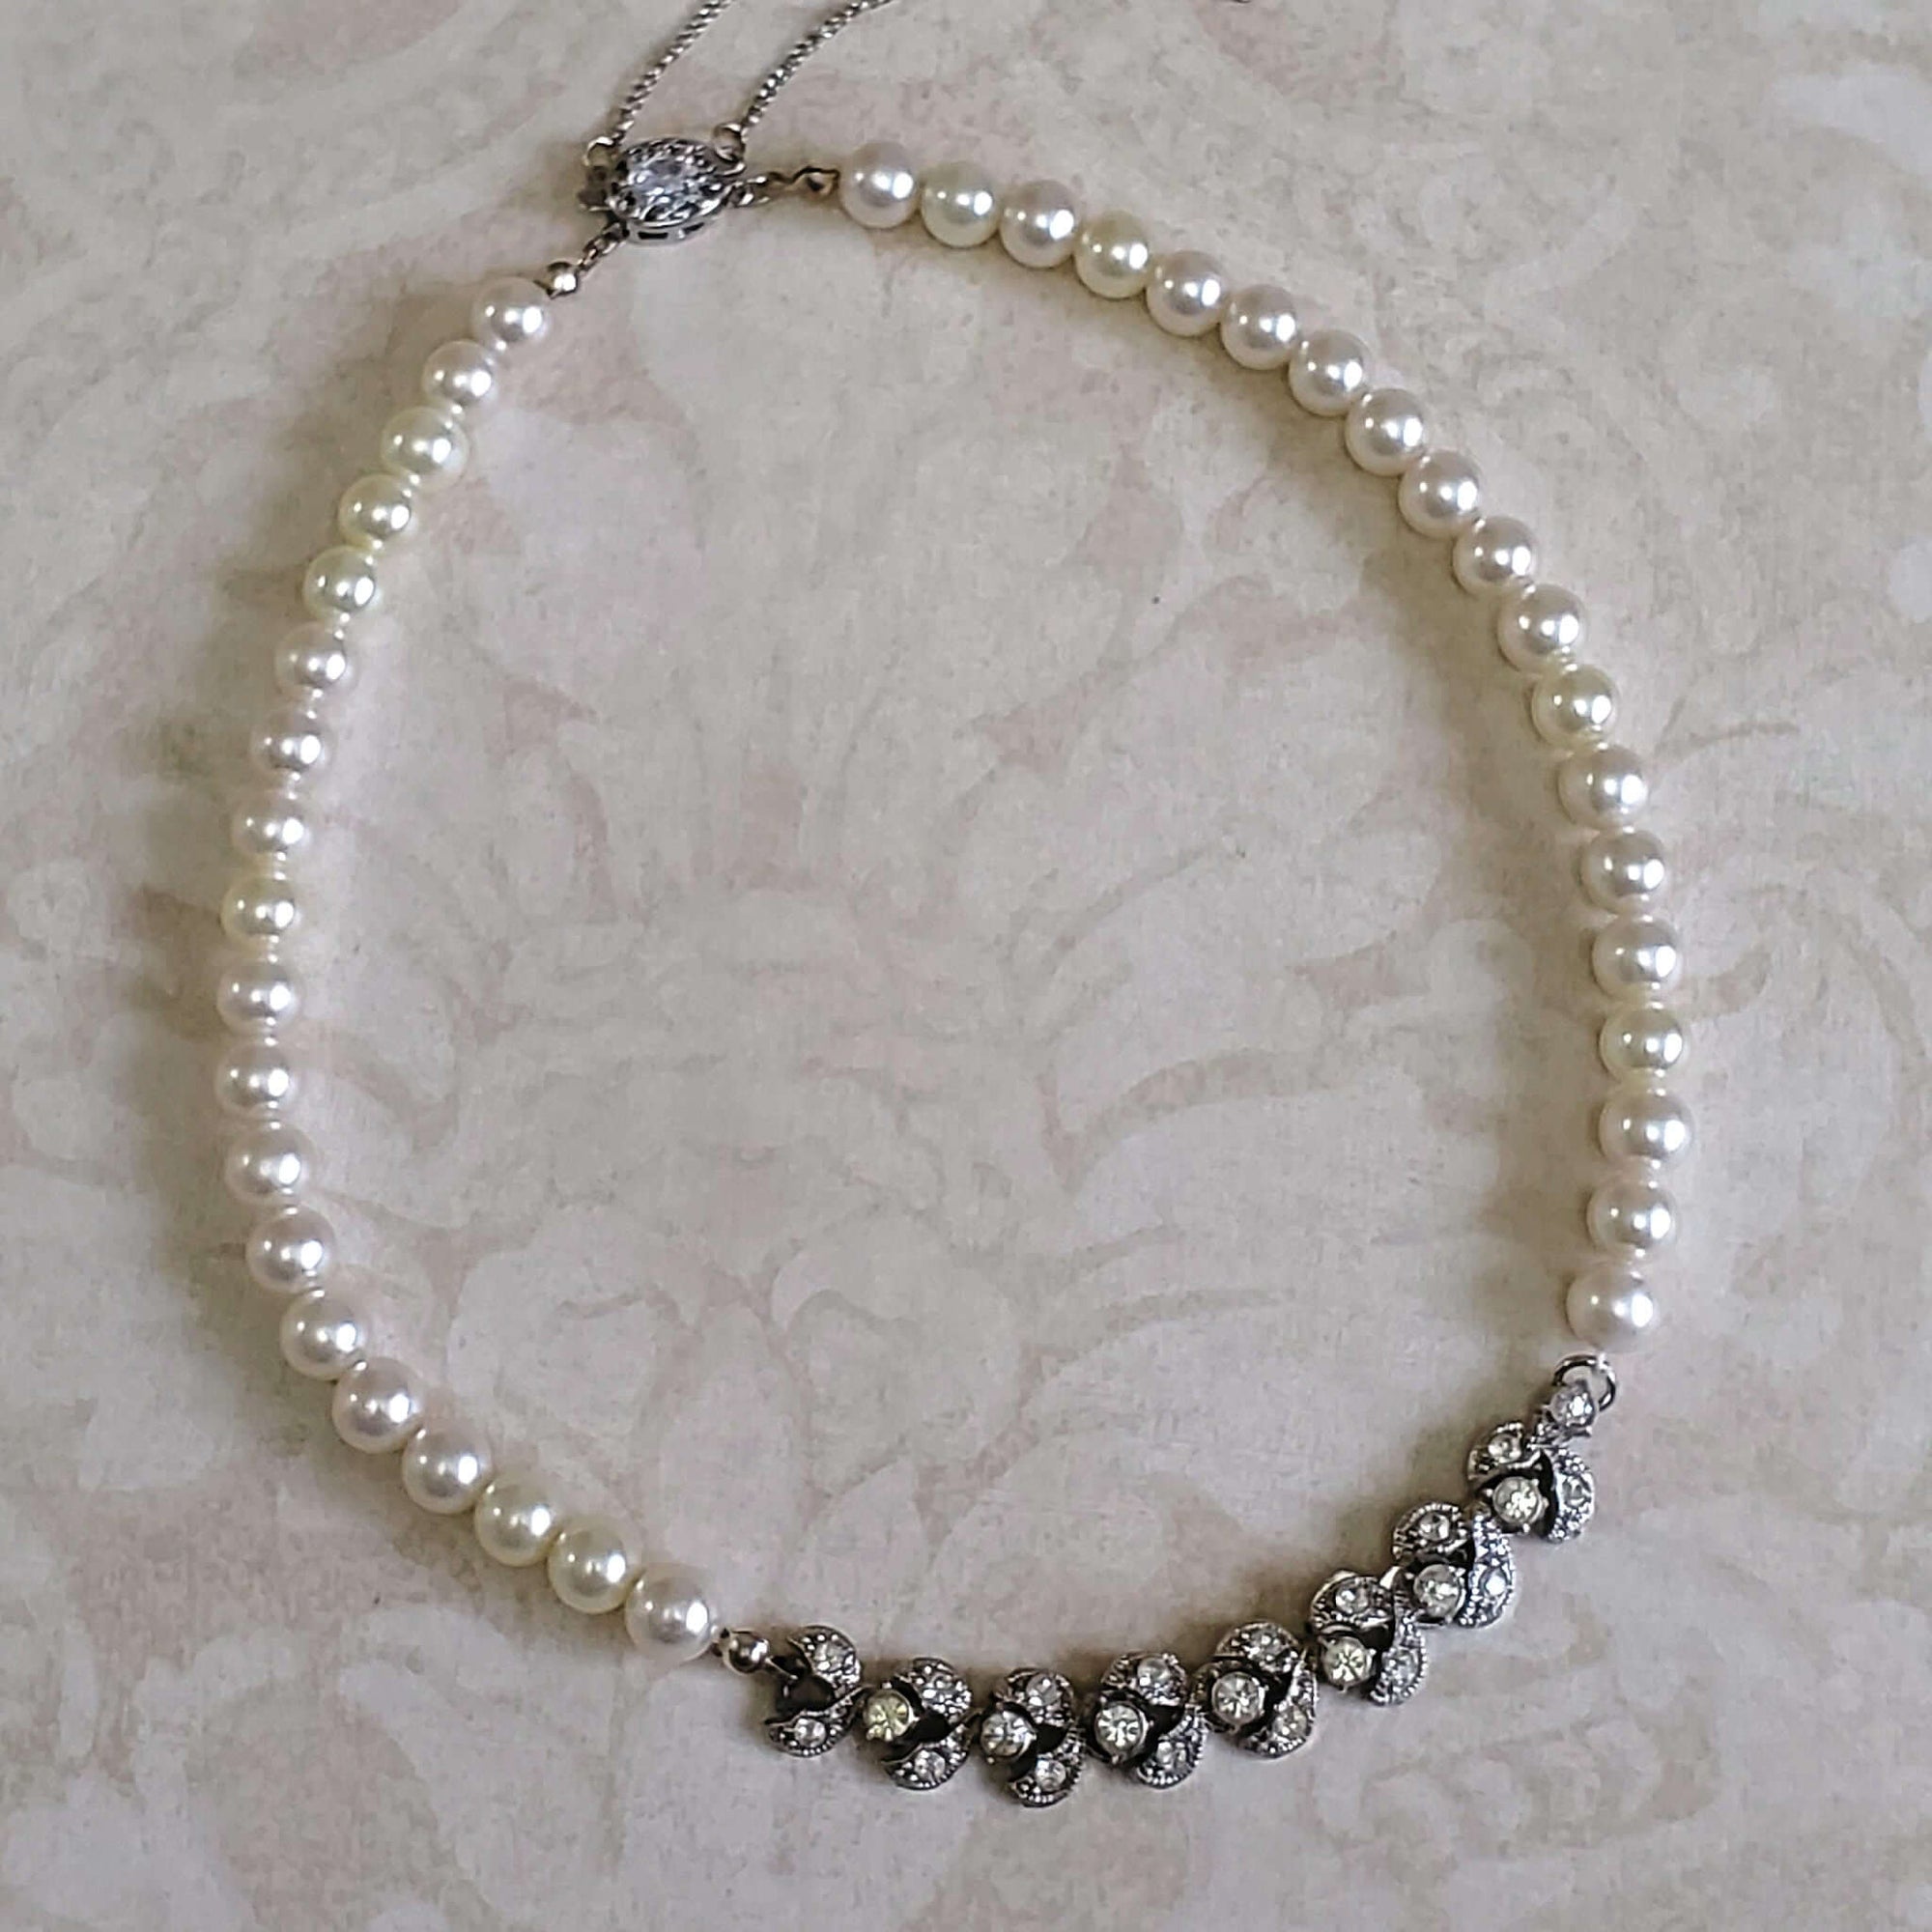 Vintage Pearl Necklace with Crystal Pendant